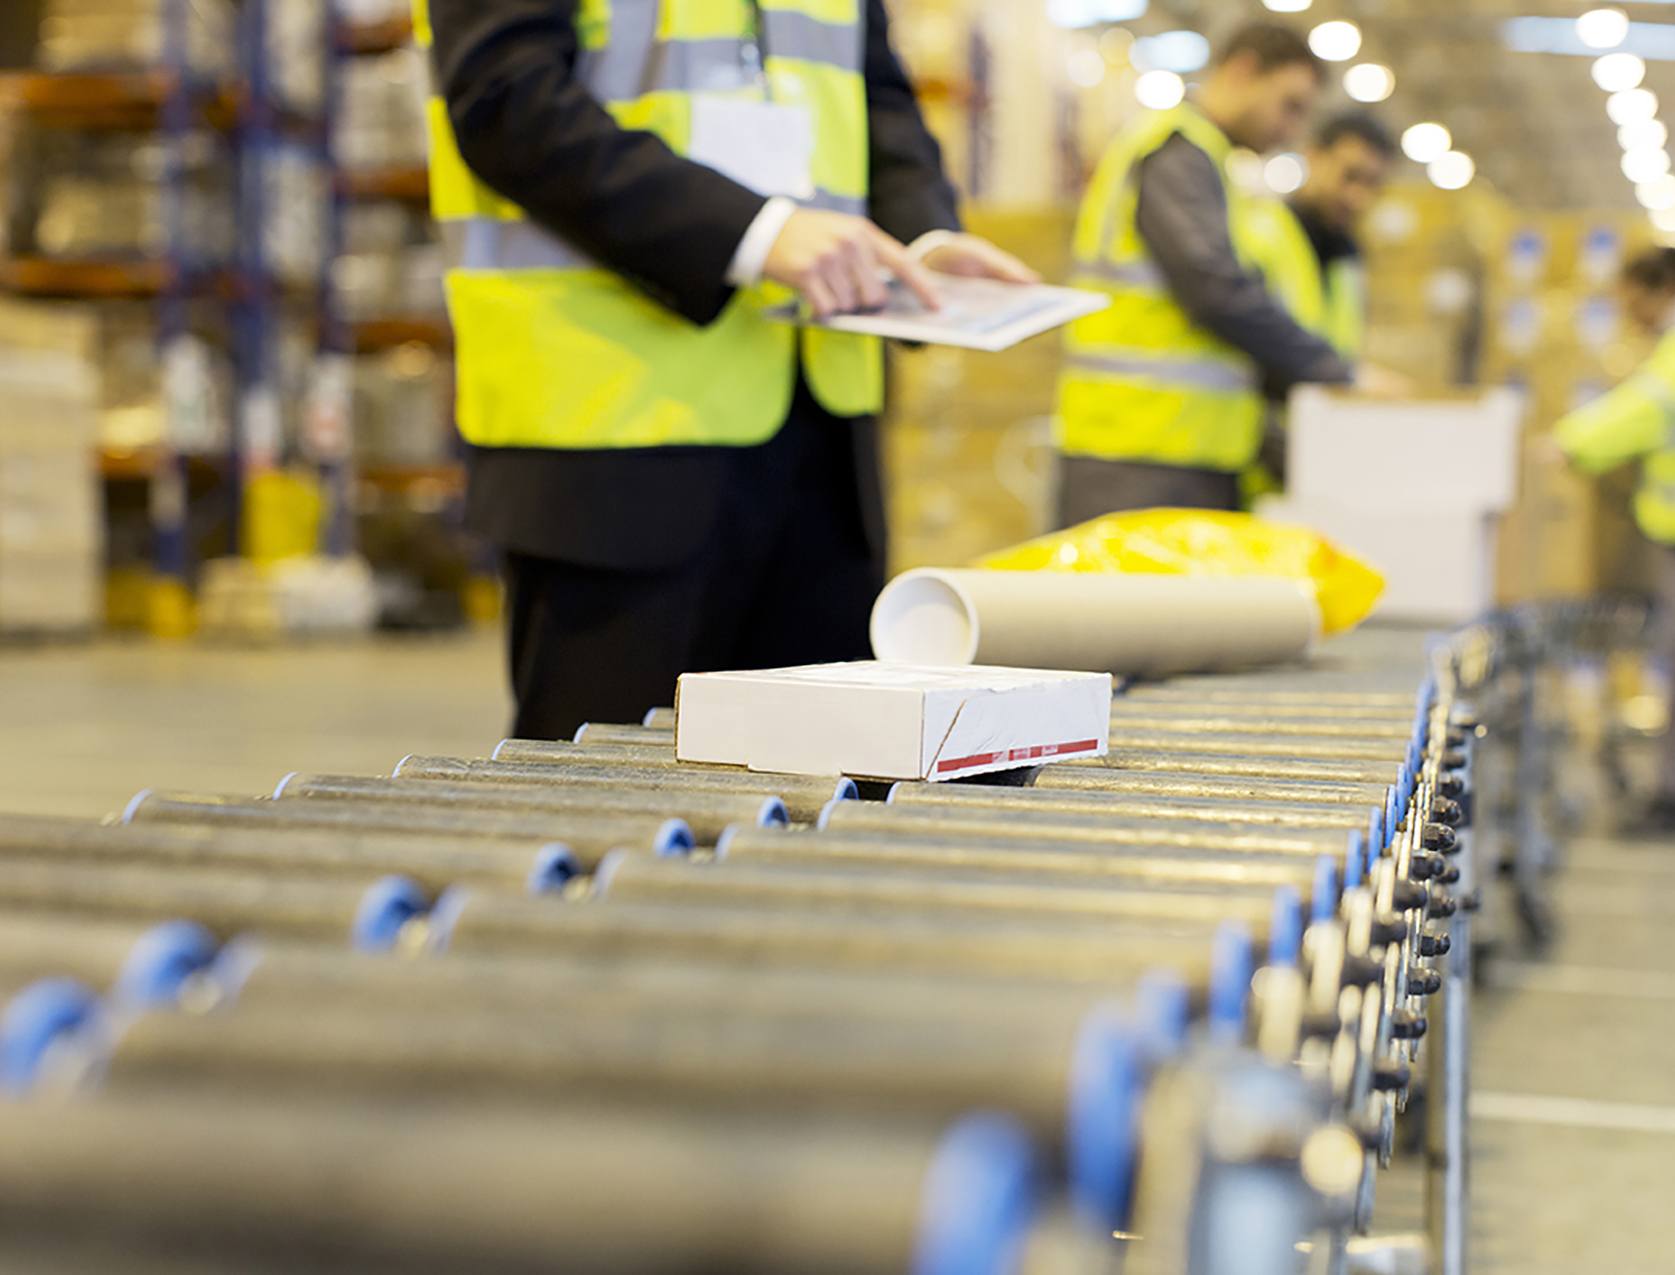 Supply Chain Management: Looking Beyond Cost When Evaluating Efficiency